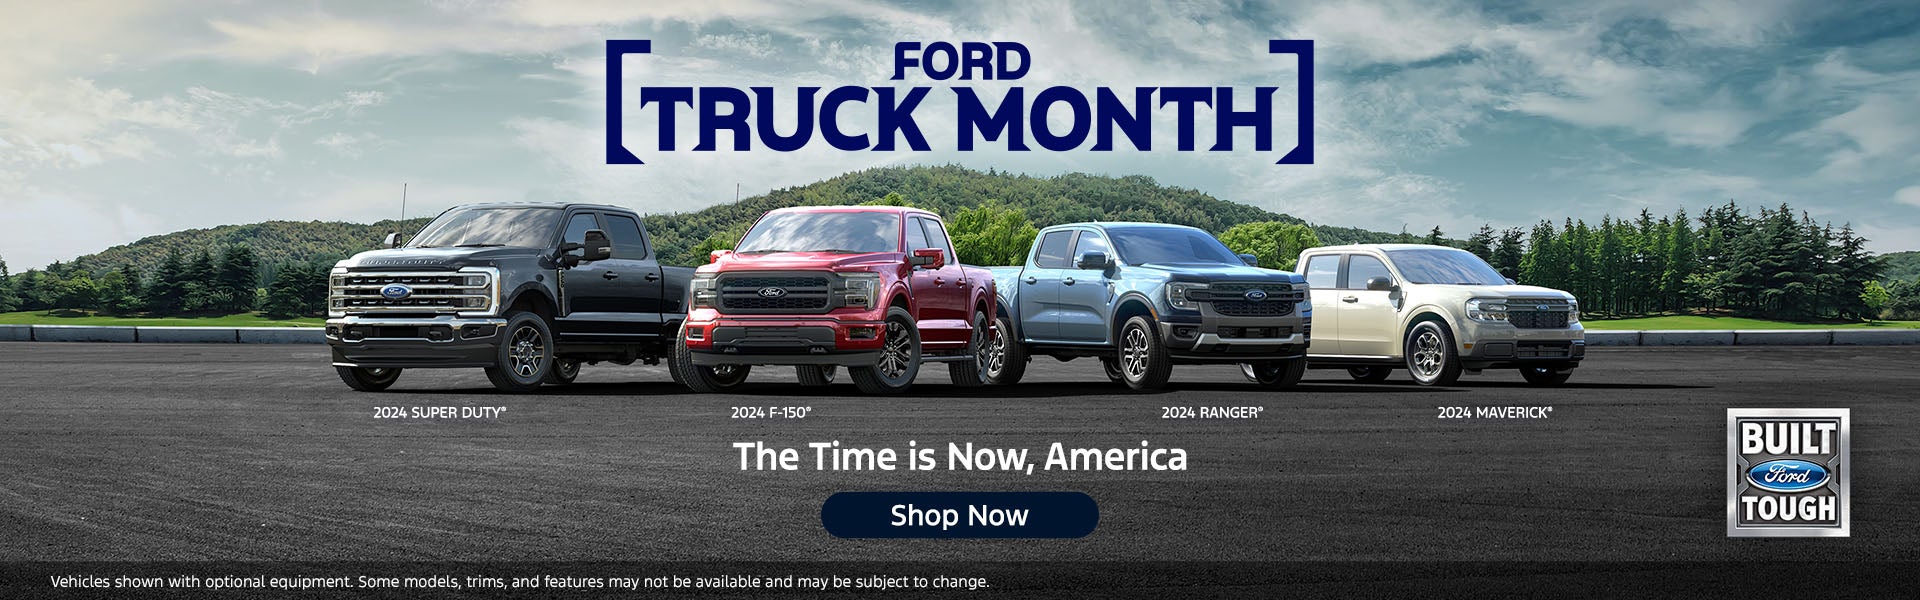 2024 Ford Truck Month